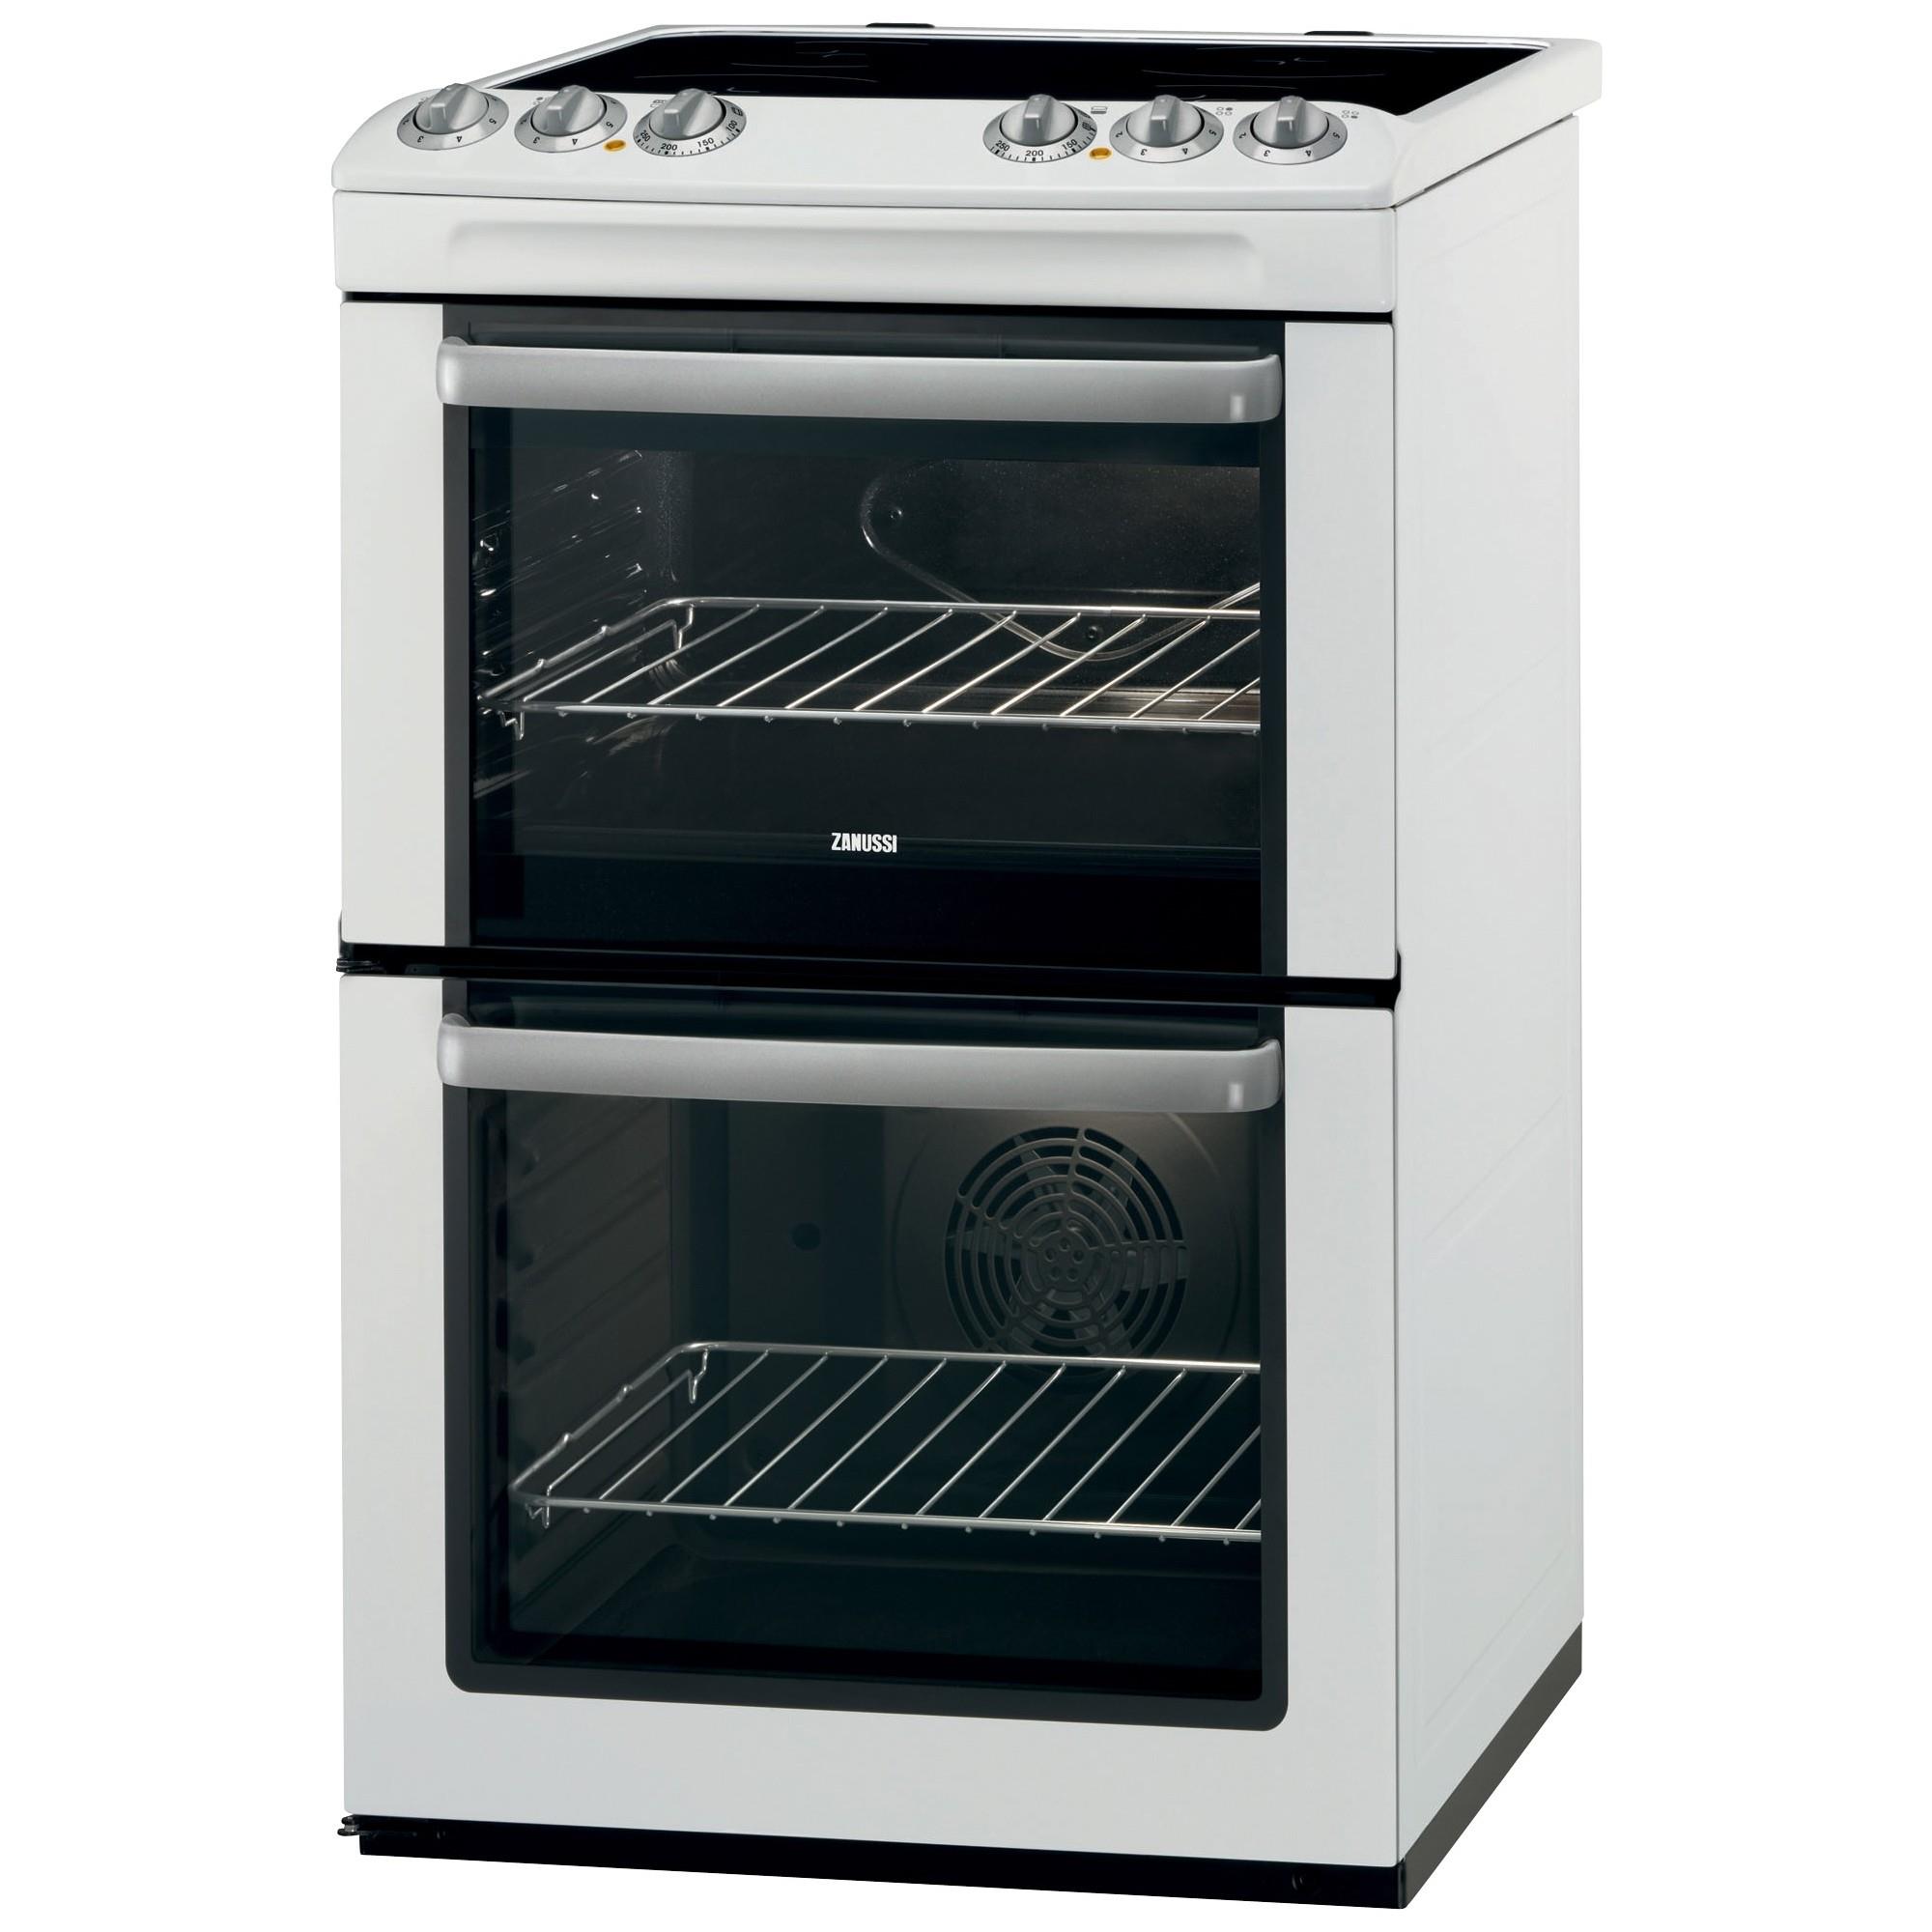 electric oven 55cm wide